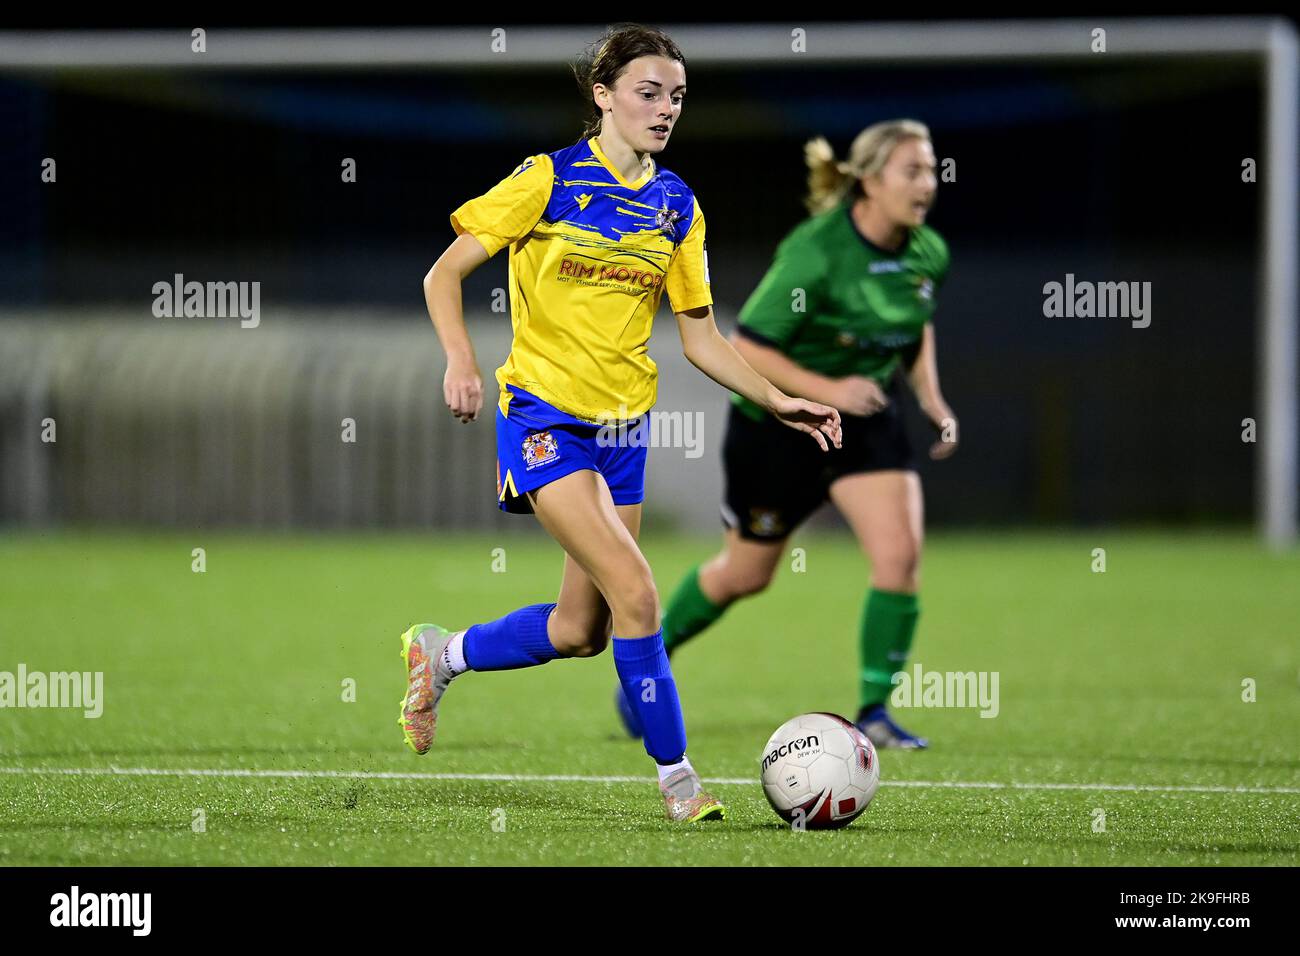 Barry, Wales. 27th Oct, 2022. Anna Houghton of Barry Town Utd Women  - Mandatory by-line: Ashley Crowden  - 27/10/2022 - FOOTBALL - Jenner Park Stadium - Barry, Wales - Barry Town United Women vs Aberystwyth Town Women’s FC - Genero Adran Premier Phase 1 22/23 Credit: Ashley Crowden/Alamy Live News Stock Photo